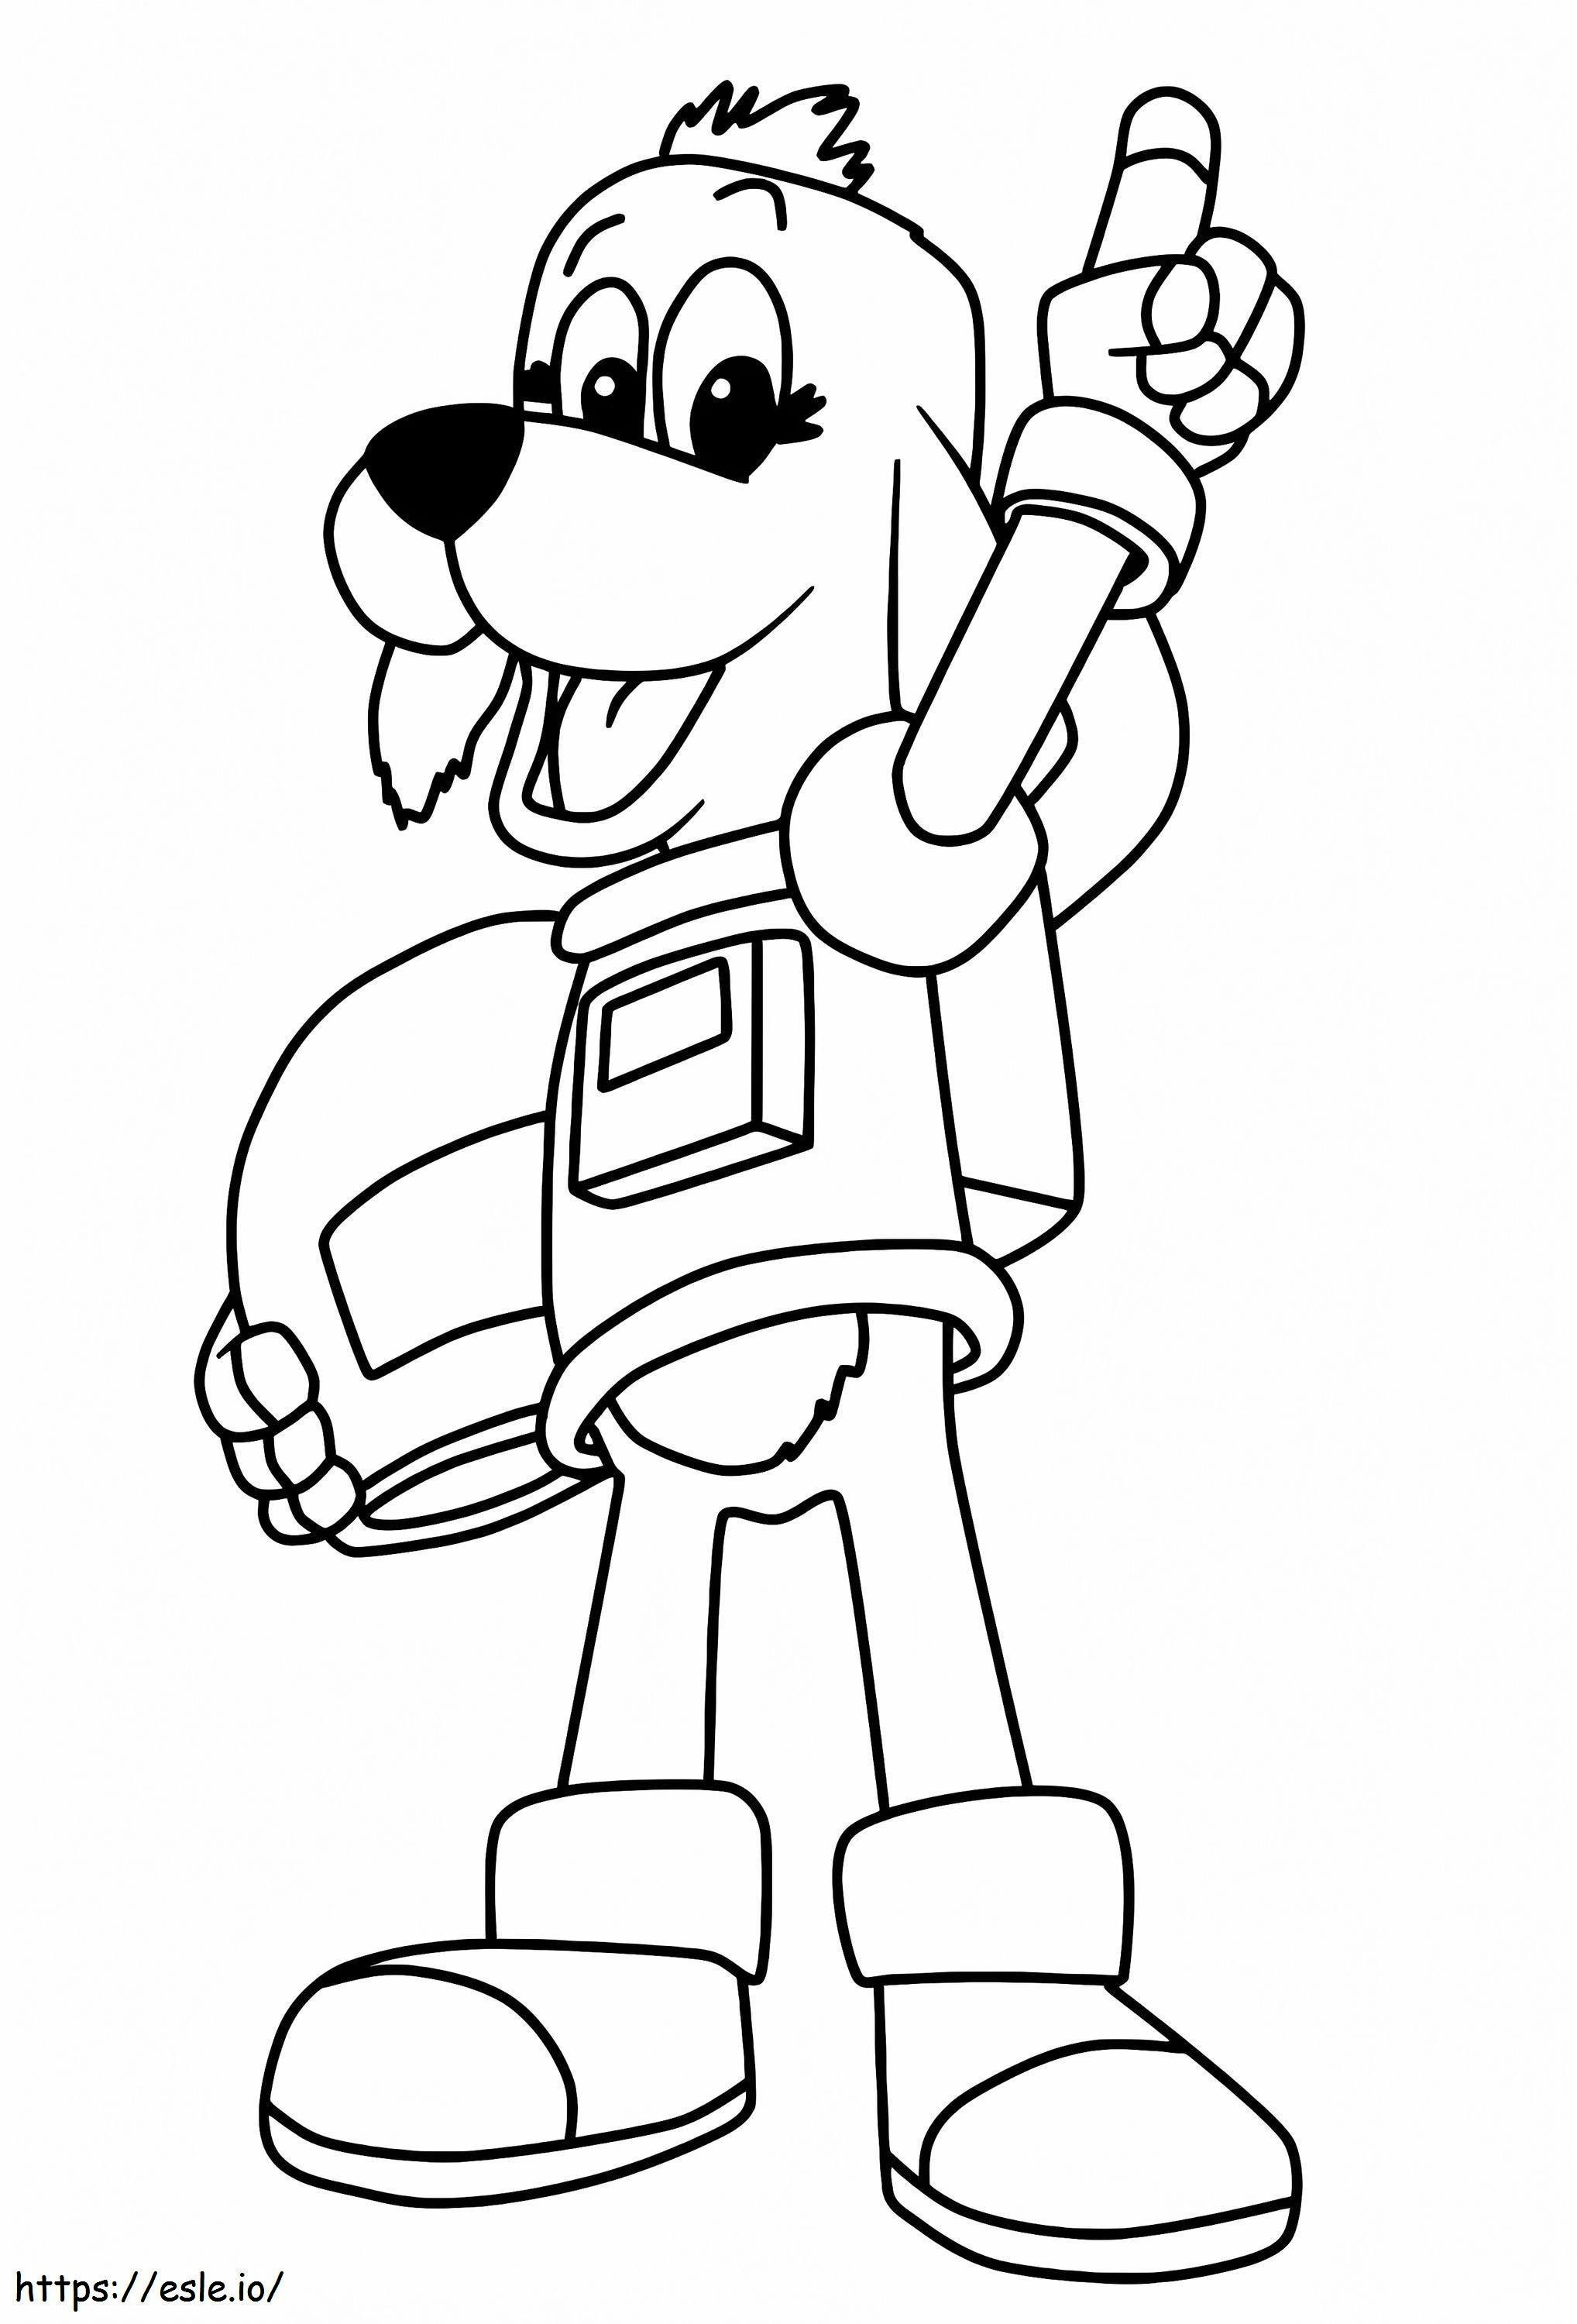 Go Dog Go To Print coloring page